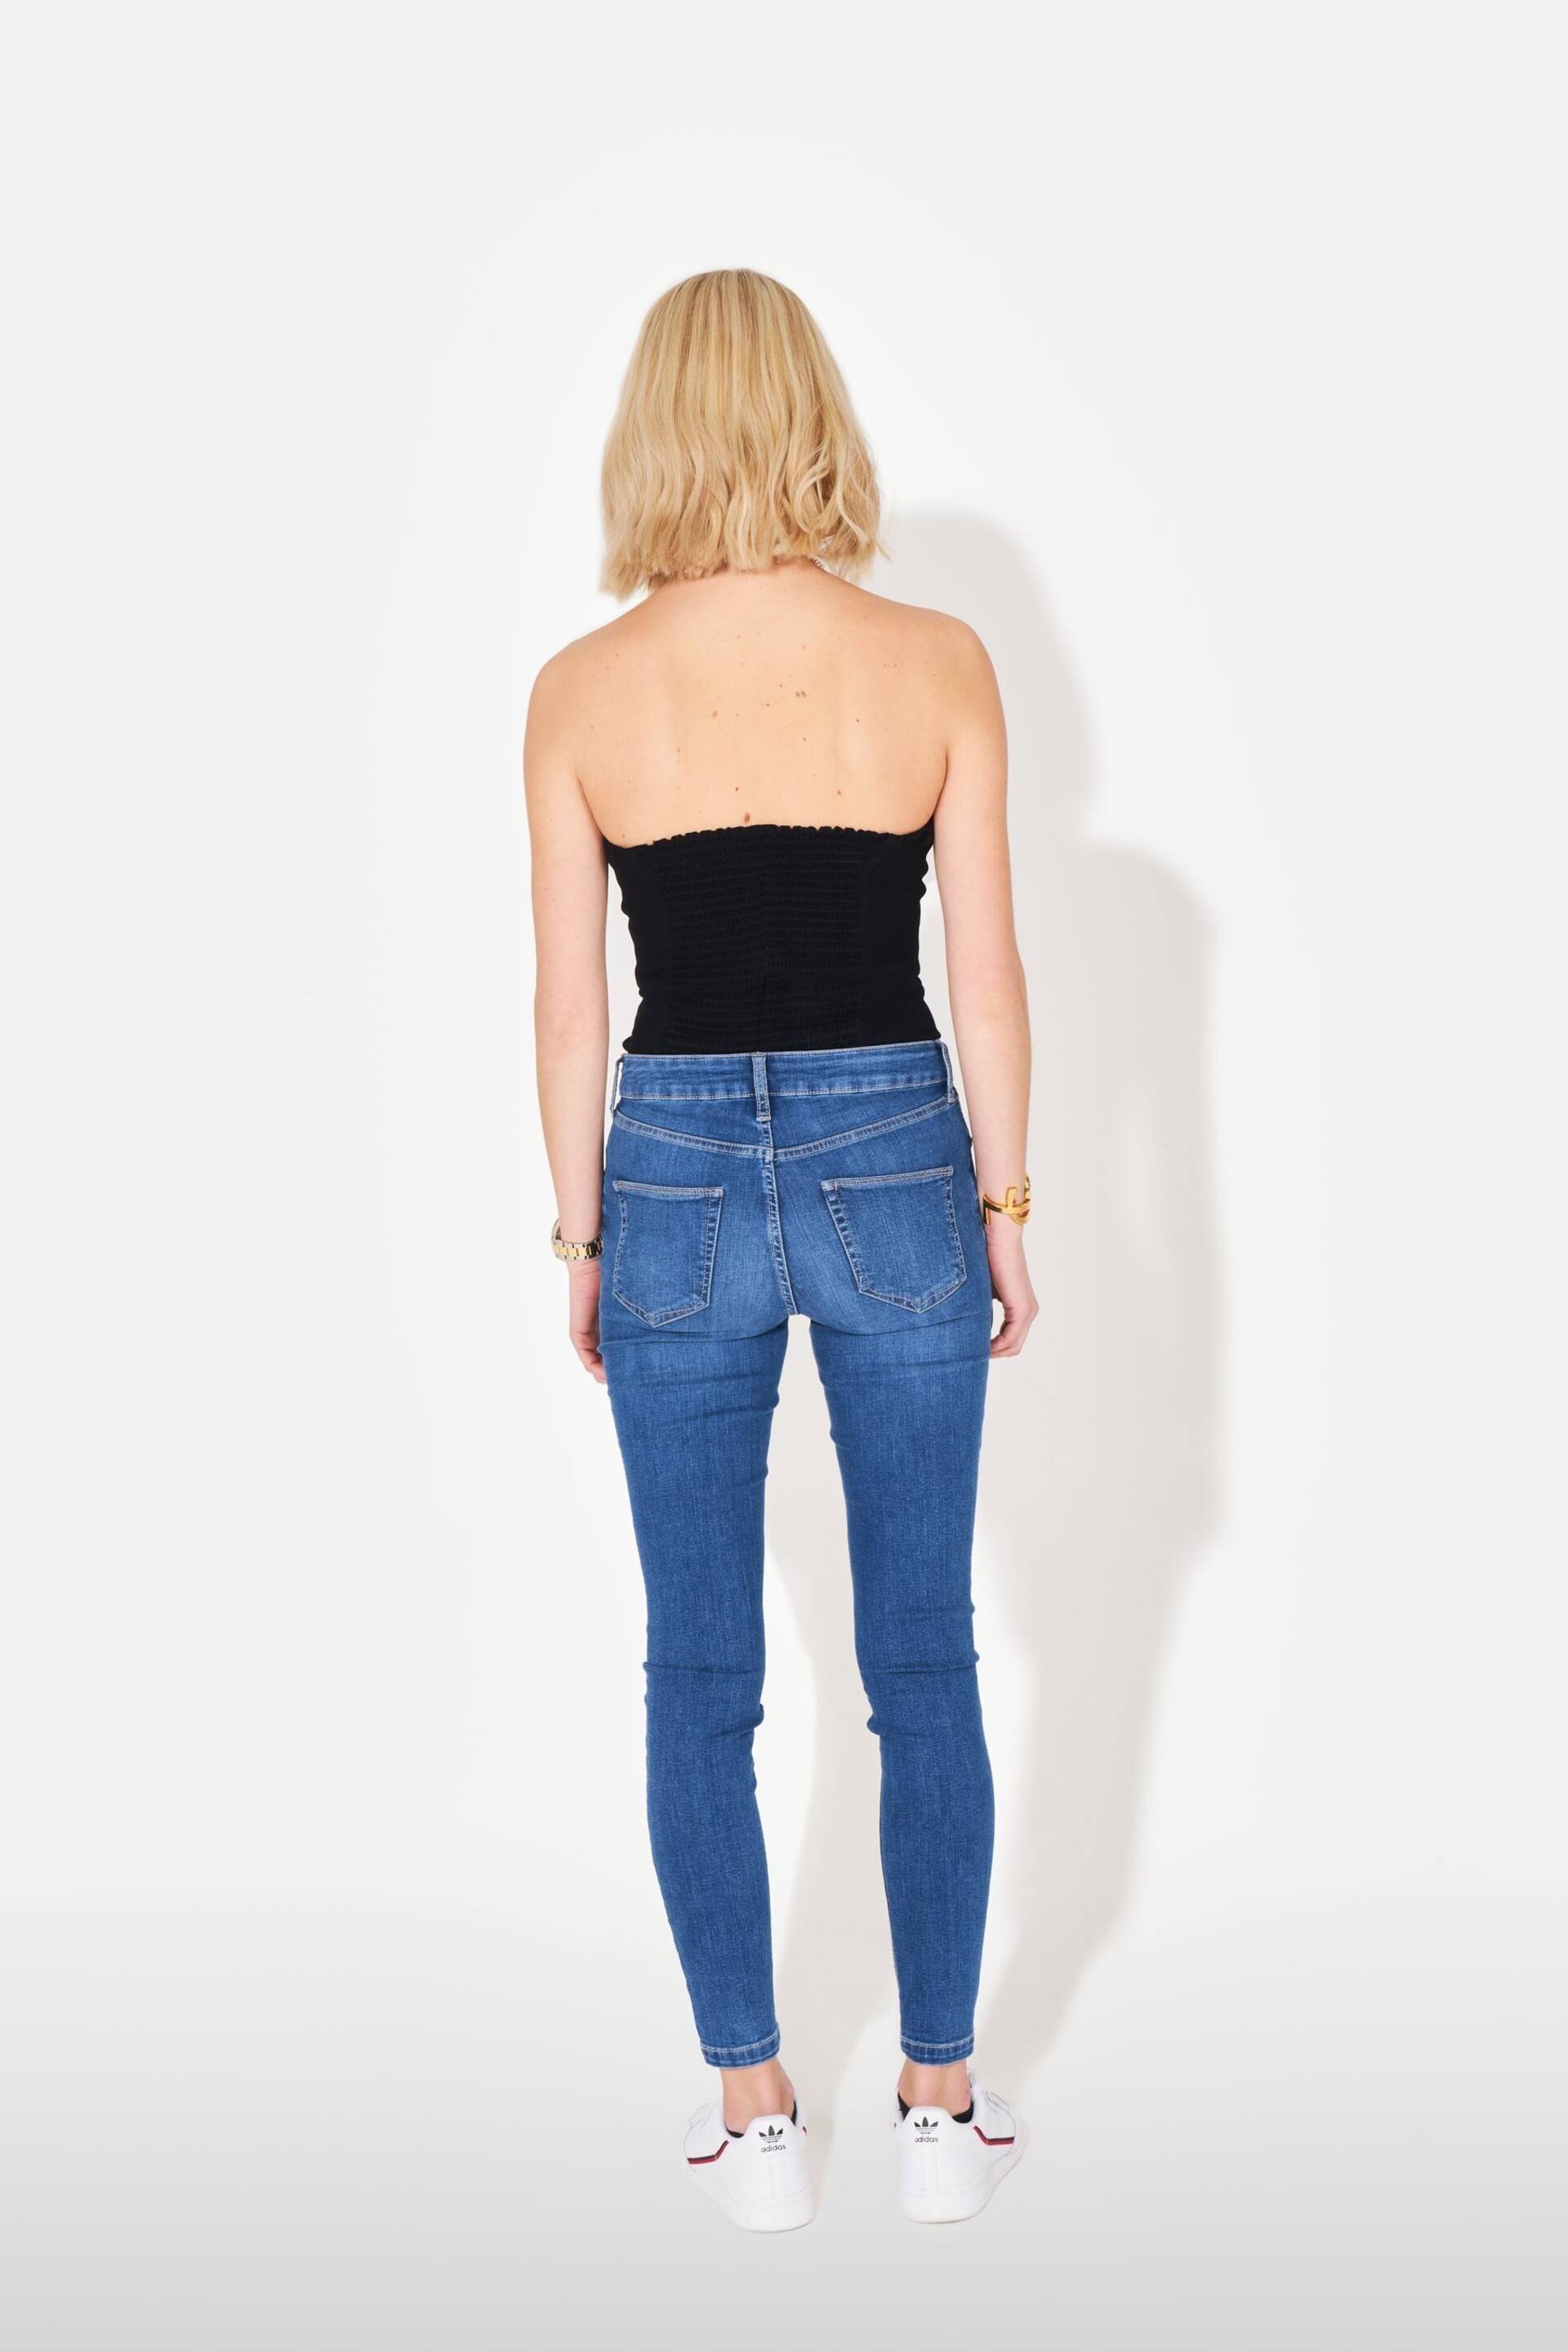 Blue Denim Donna Ida Skinny Blue Rizzo High Rise Ankle Jeans - Image 2 of 6